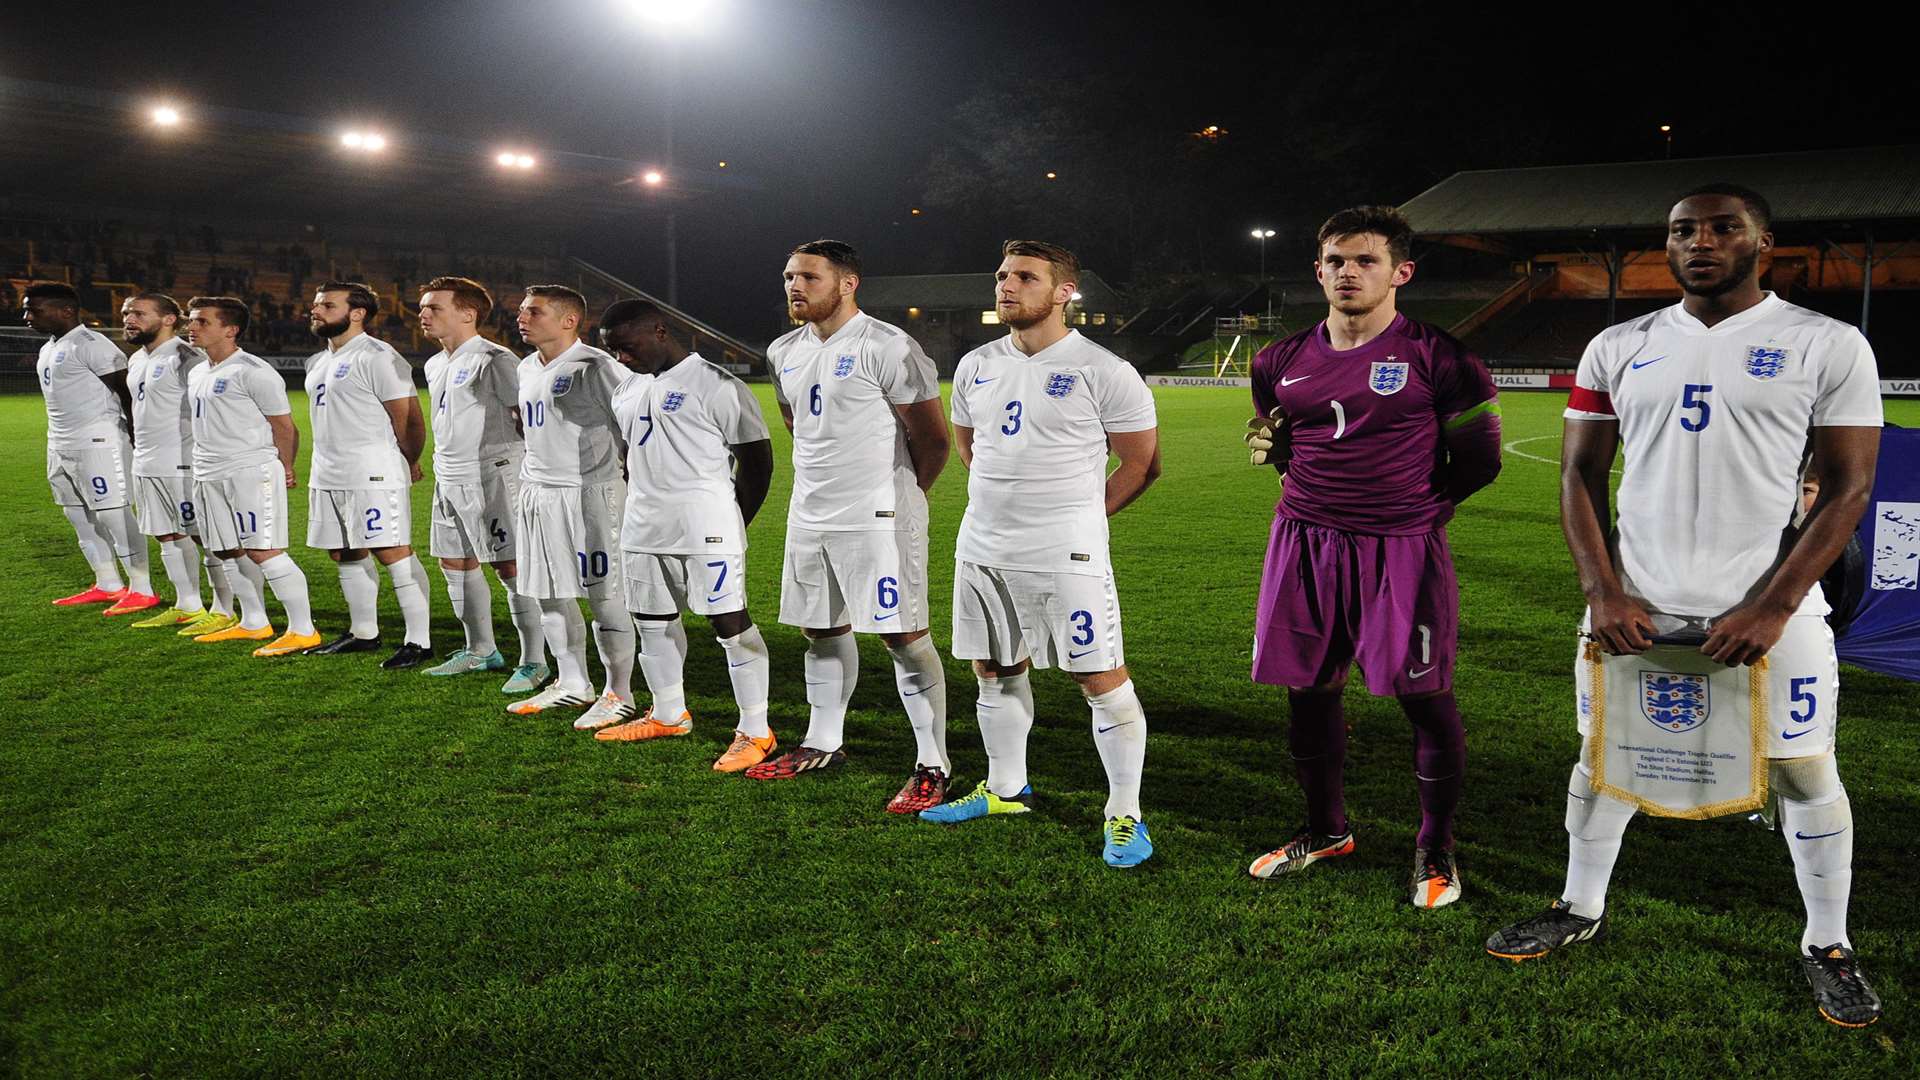 England C line up for their game against Estonia U23 at Halifax Picture: Pinnacle